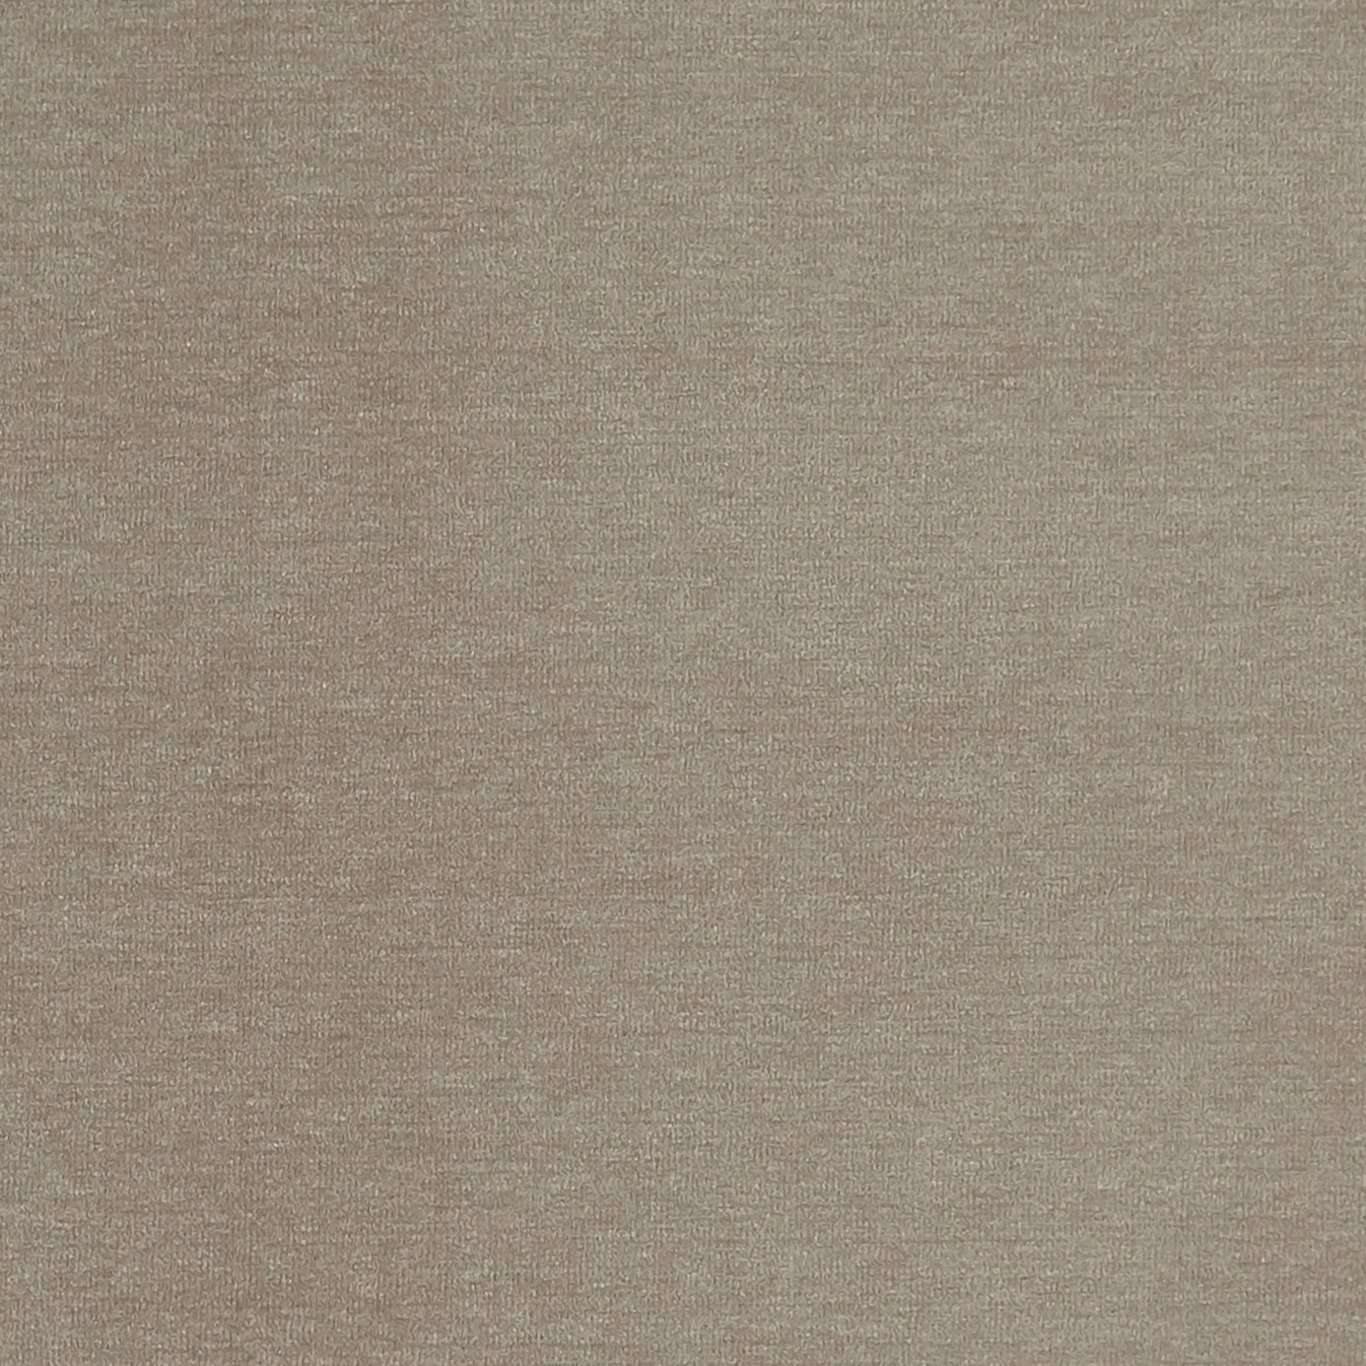 Maculo Taupe Fabric by CNC